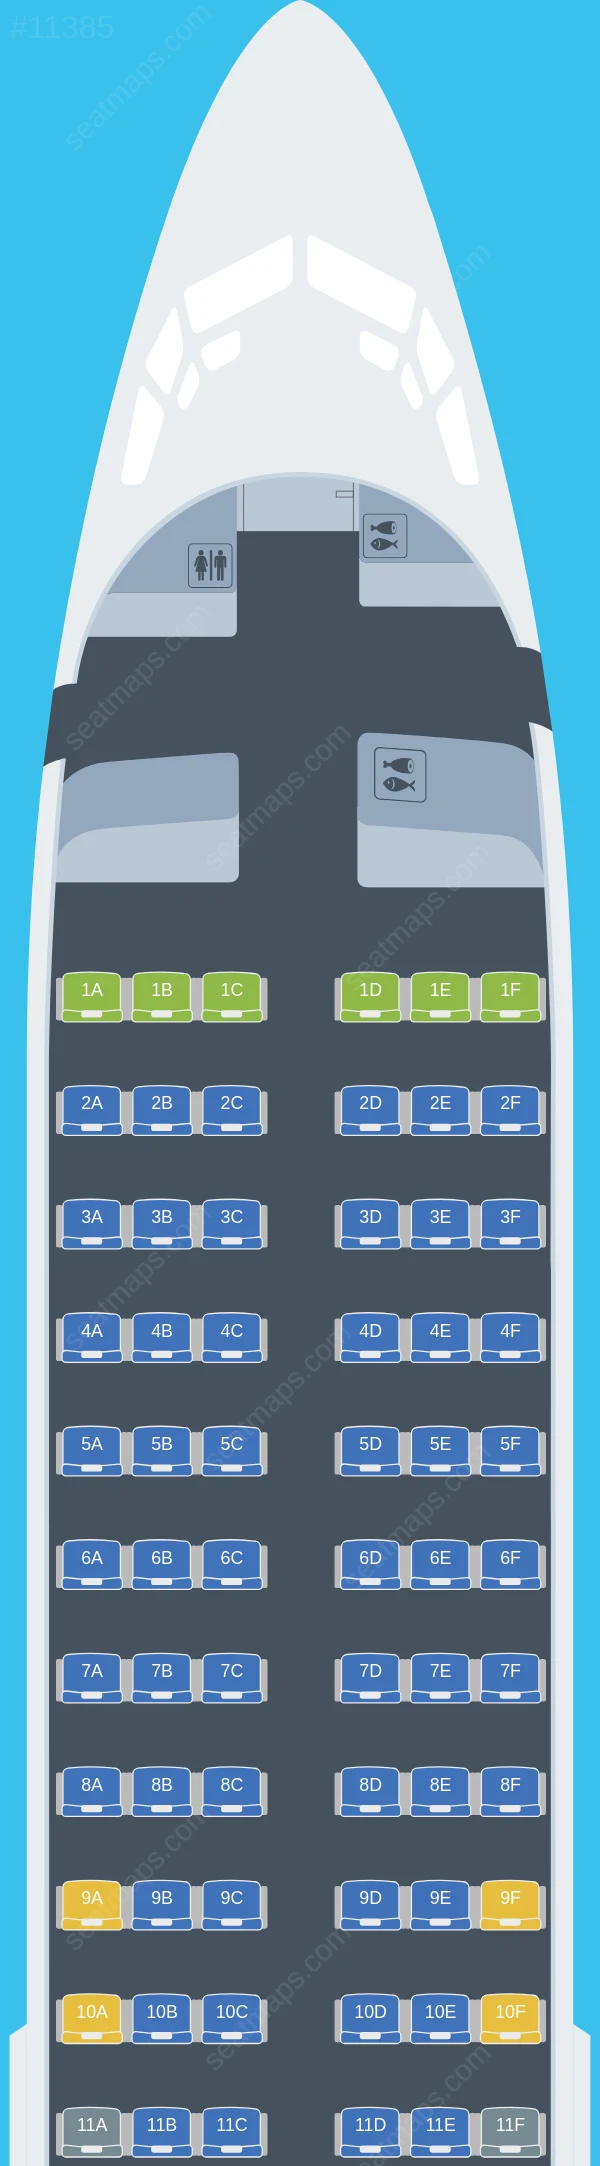 Airseven Boeing 737-400 seatmap preview